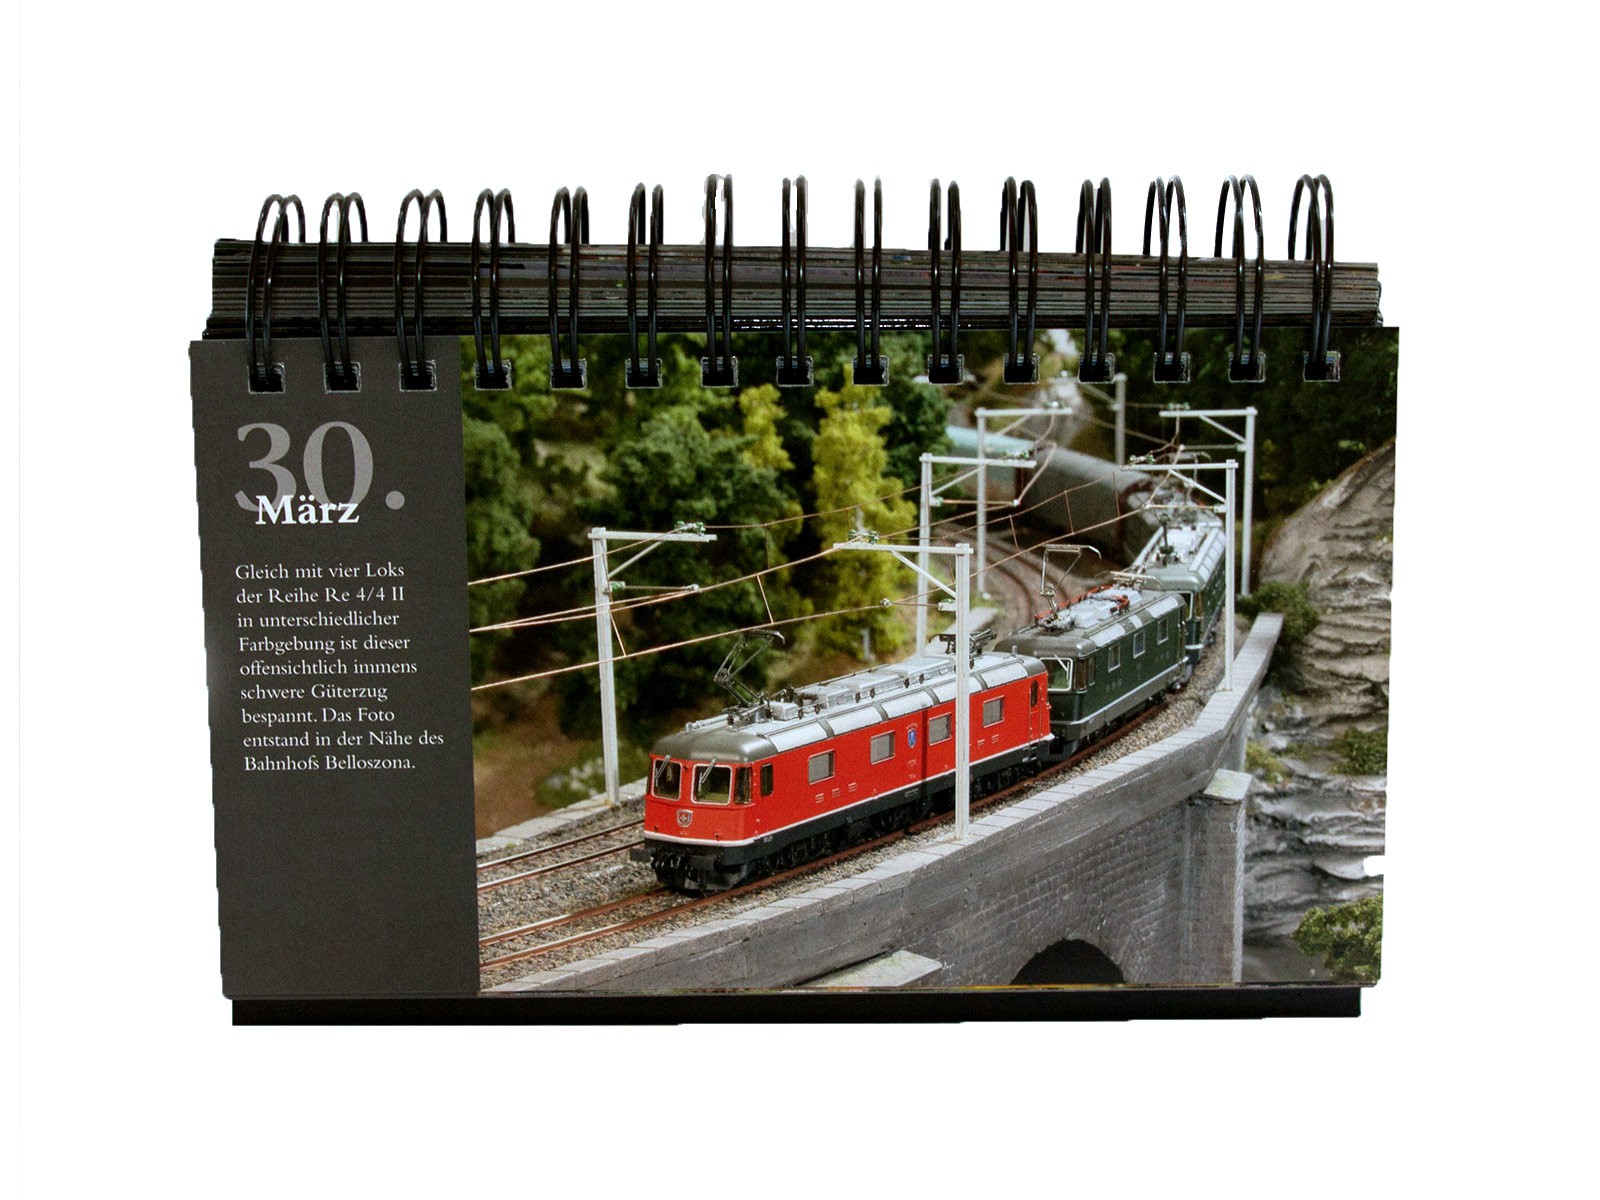 Miniatur Wunderland - perpetual calendar - with 366 pictures